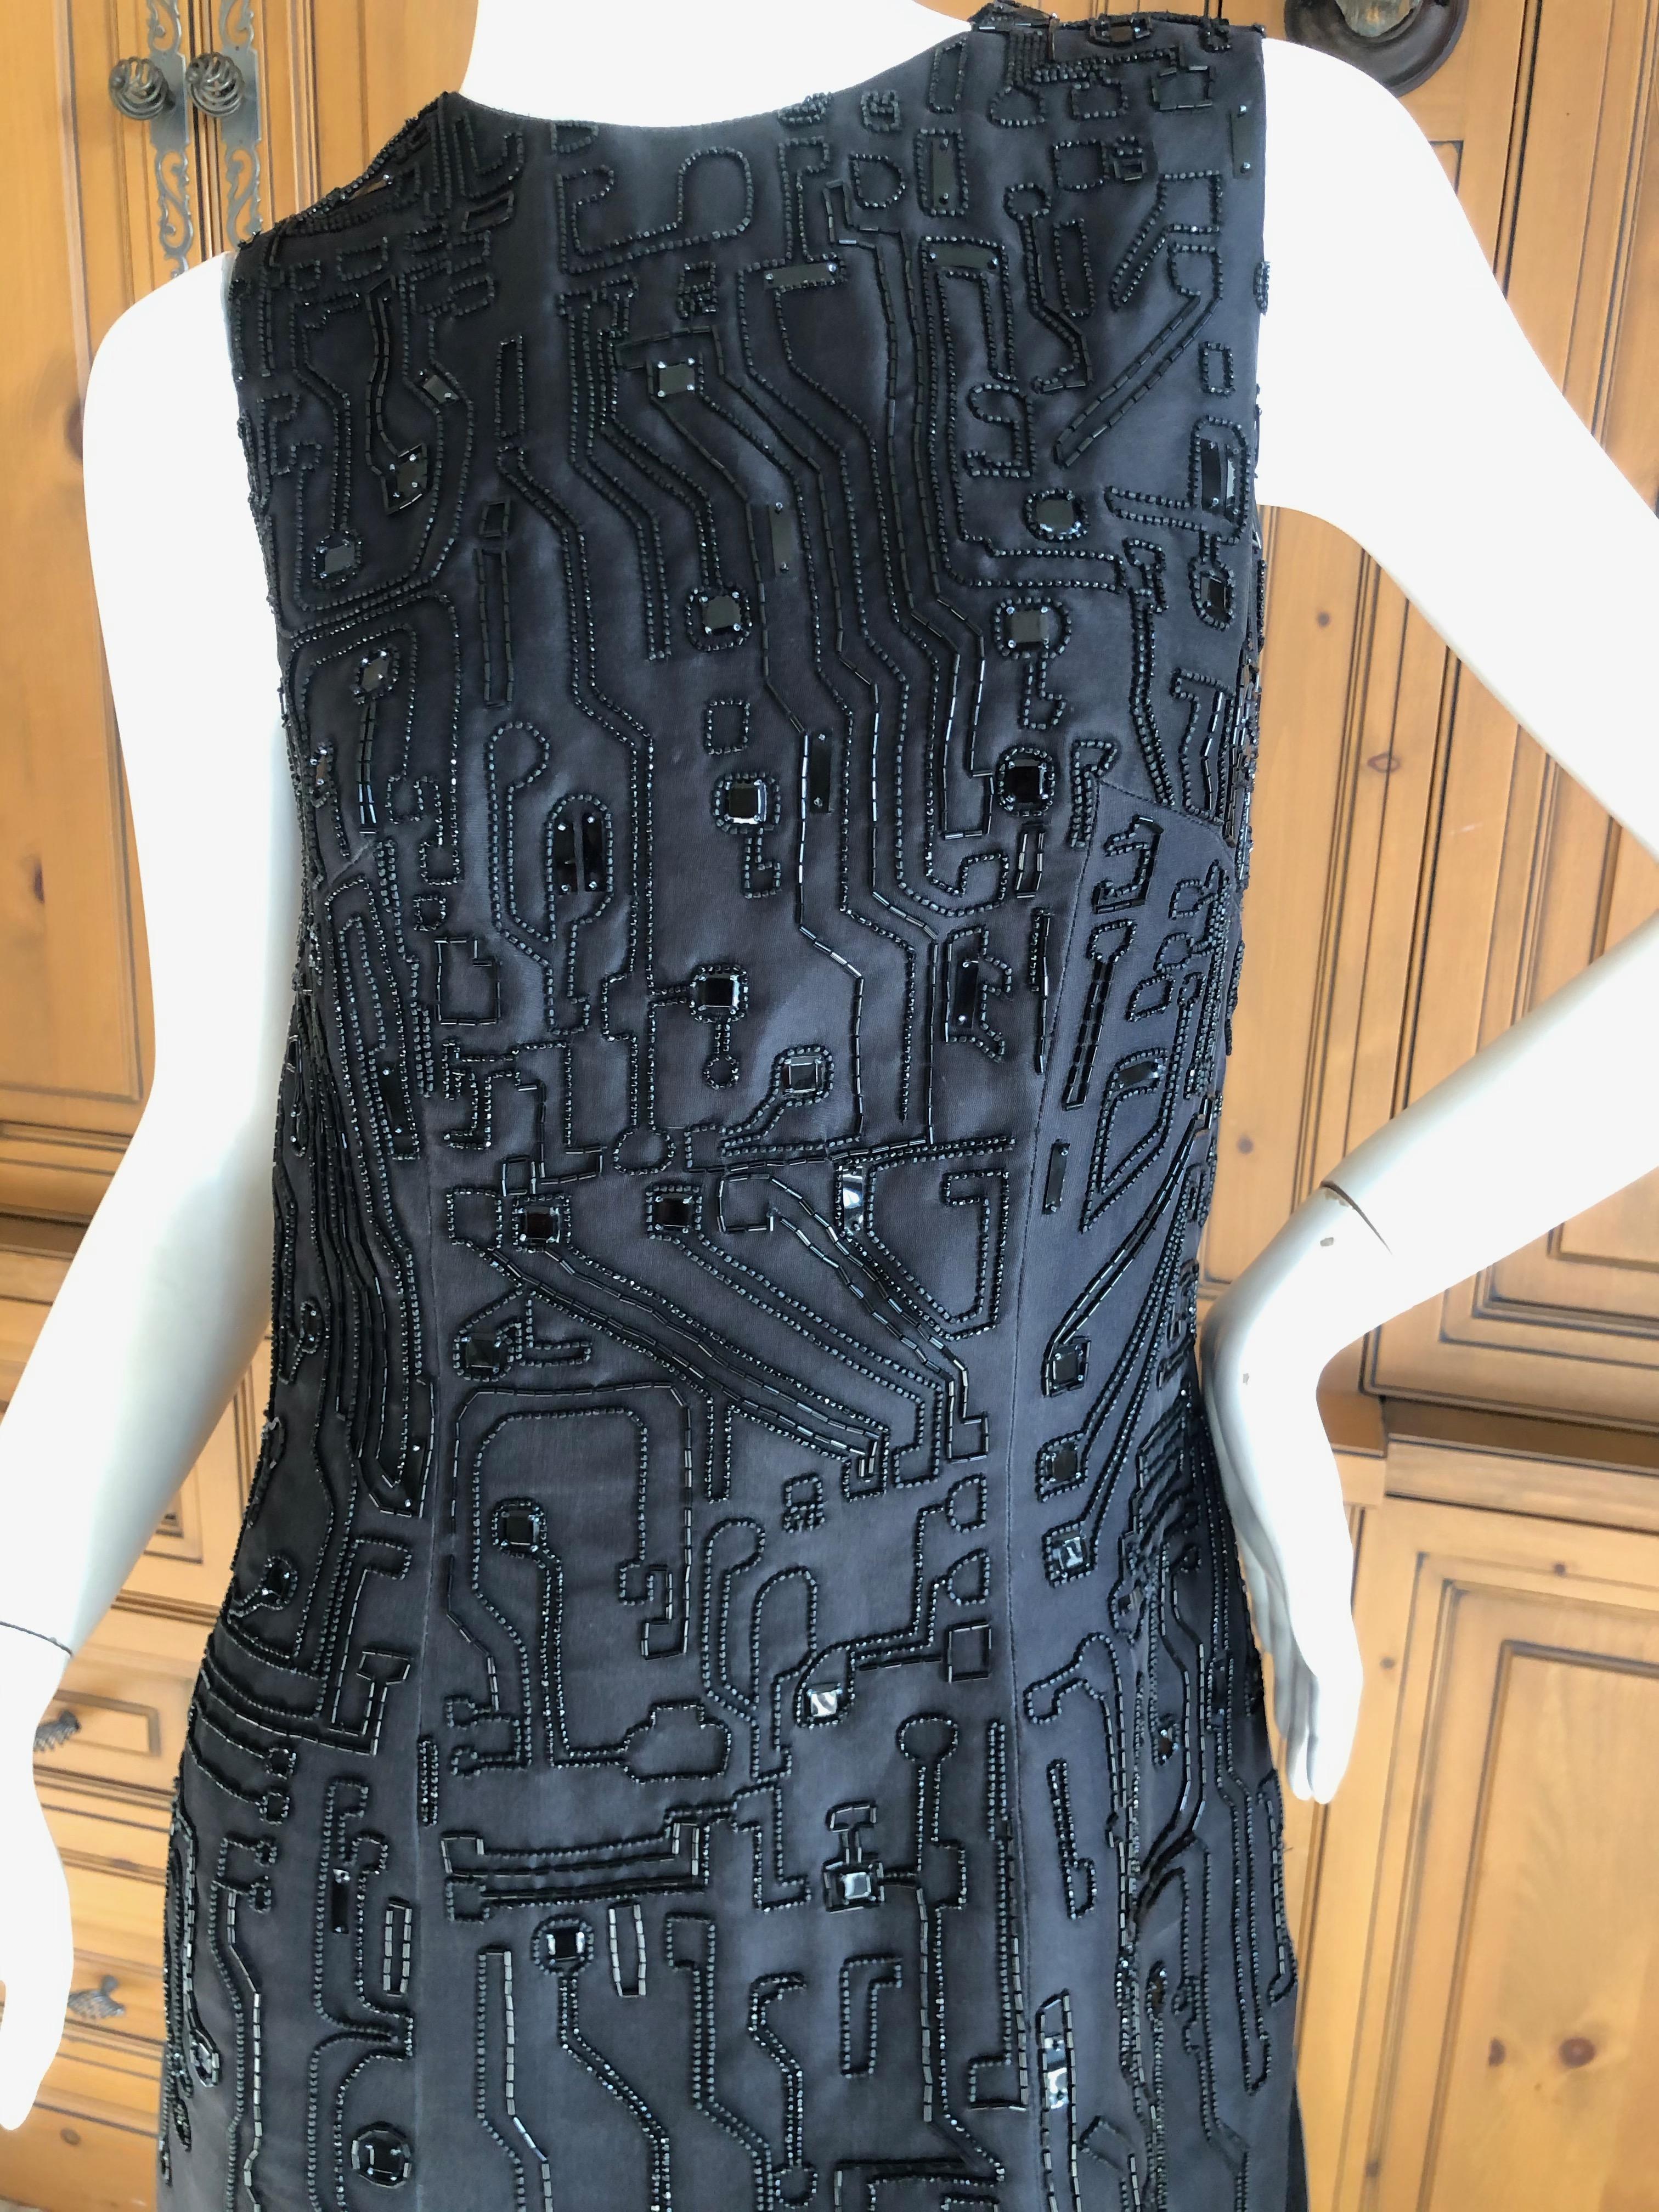 Givenchy Haute Couture by Alexander McQueen Fall '99 Circuit Board 